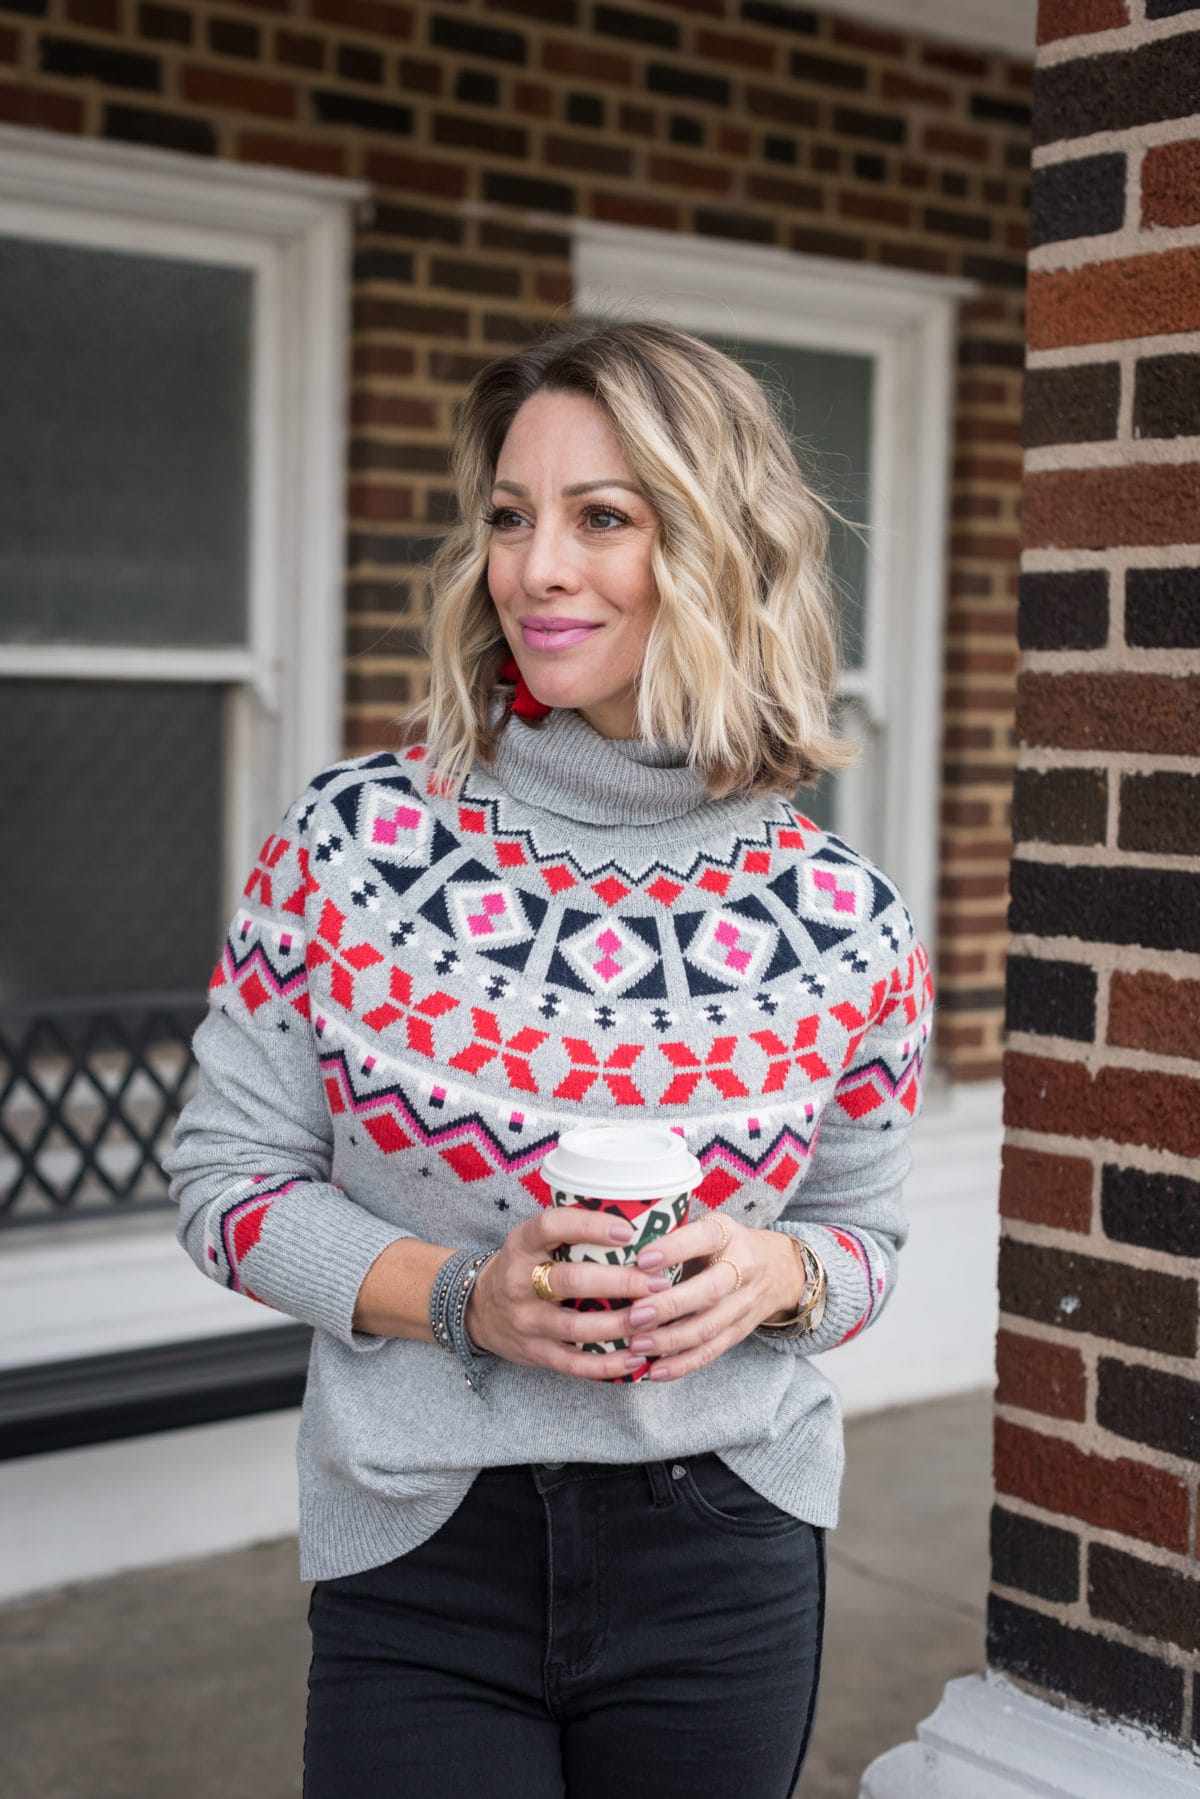 Winter outfit - fair isle sweater and jeans 